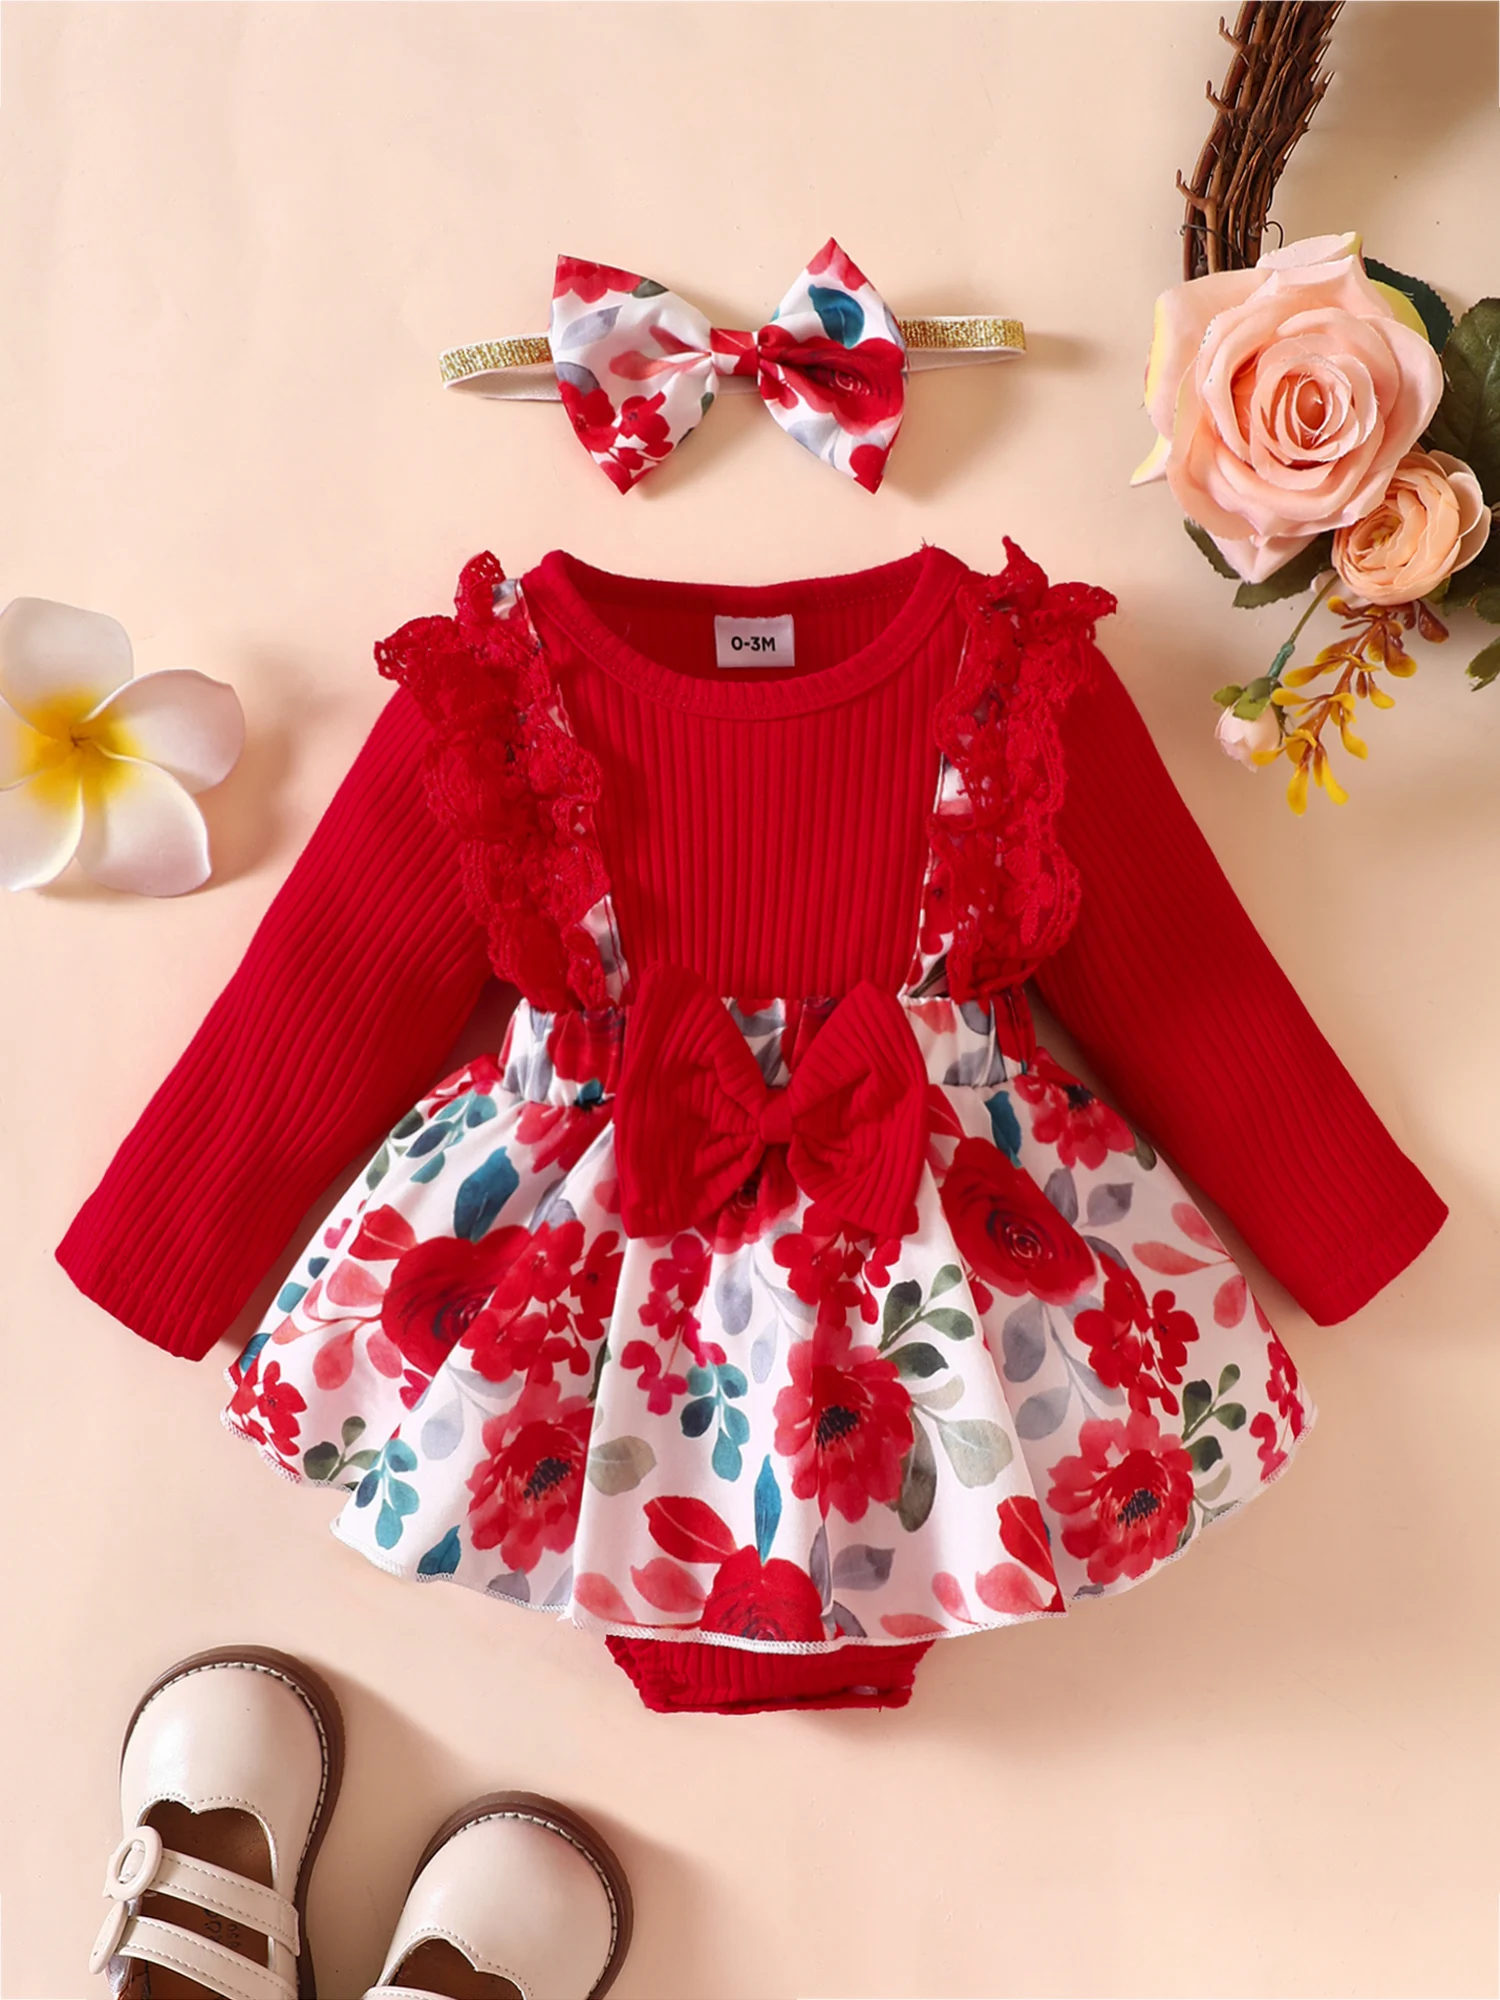 

Baby Girl Floral Print Long Sleeve Ribbed Knit Romper Dress with Lace Ruffle Skirt - Adorable Fall Bodysuit for Newborns